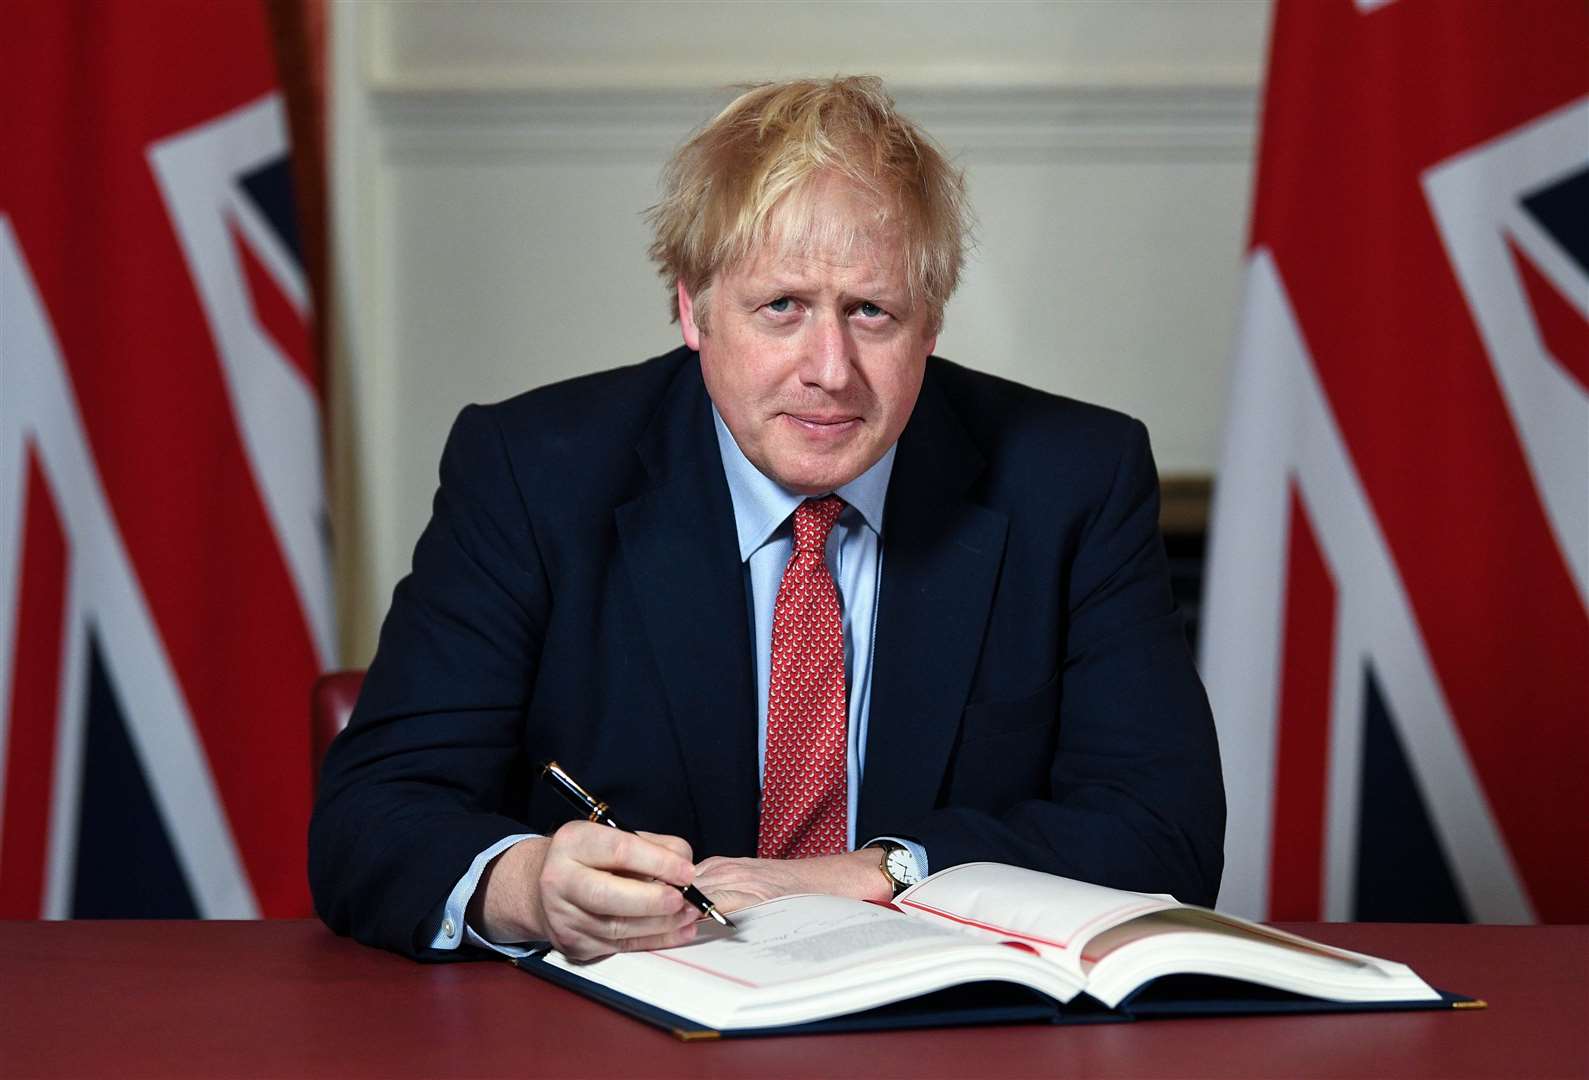 Prime Minister Boris Johnson who has been compared with a tin-pot dictator by the SNP's Westminster leader Ian Blackford.